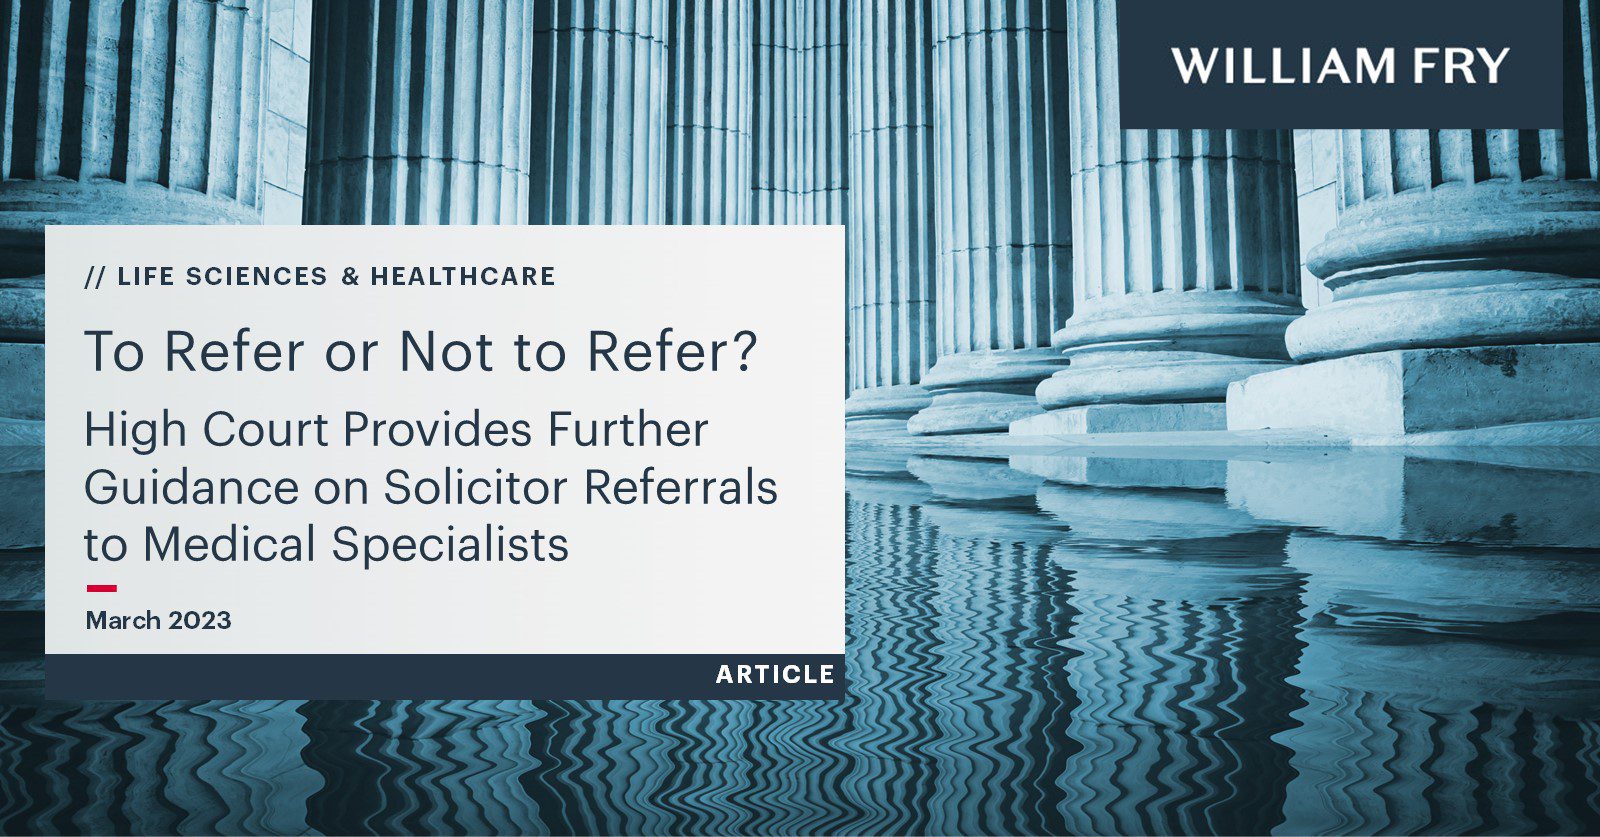 To Refer or Not to Refer? High Court Provides Further Guidance on Solicitor Referrals to Medical Specialists